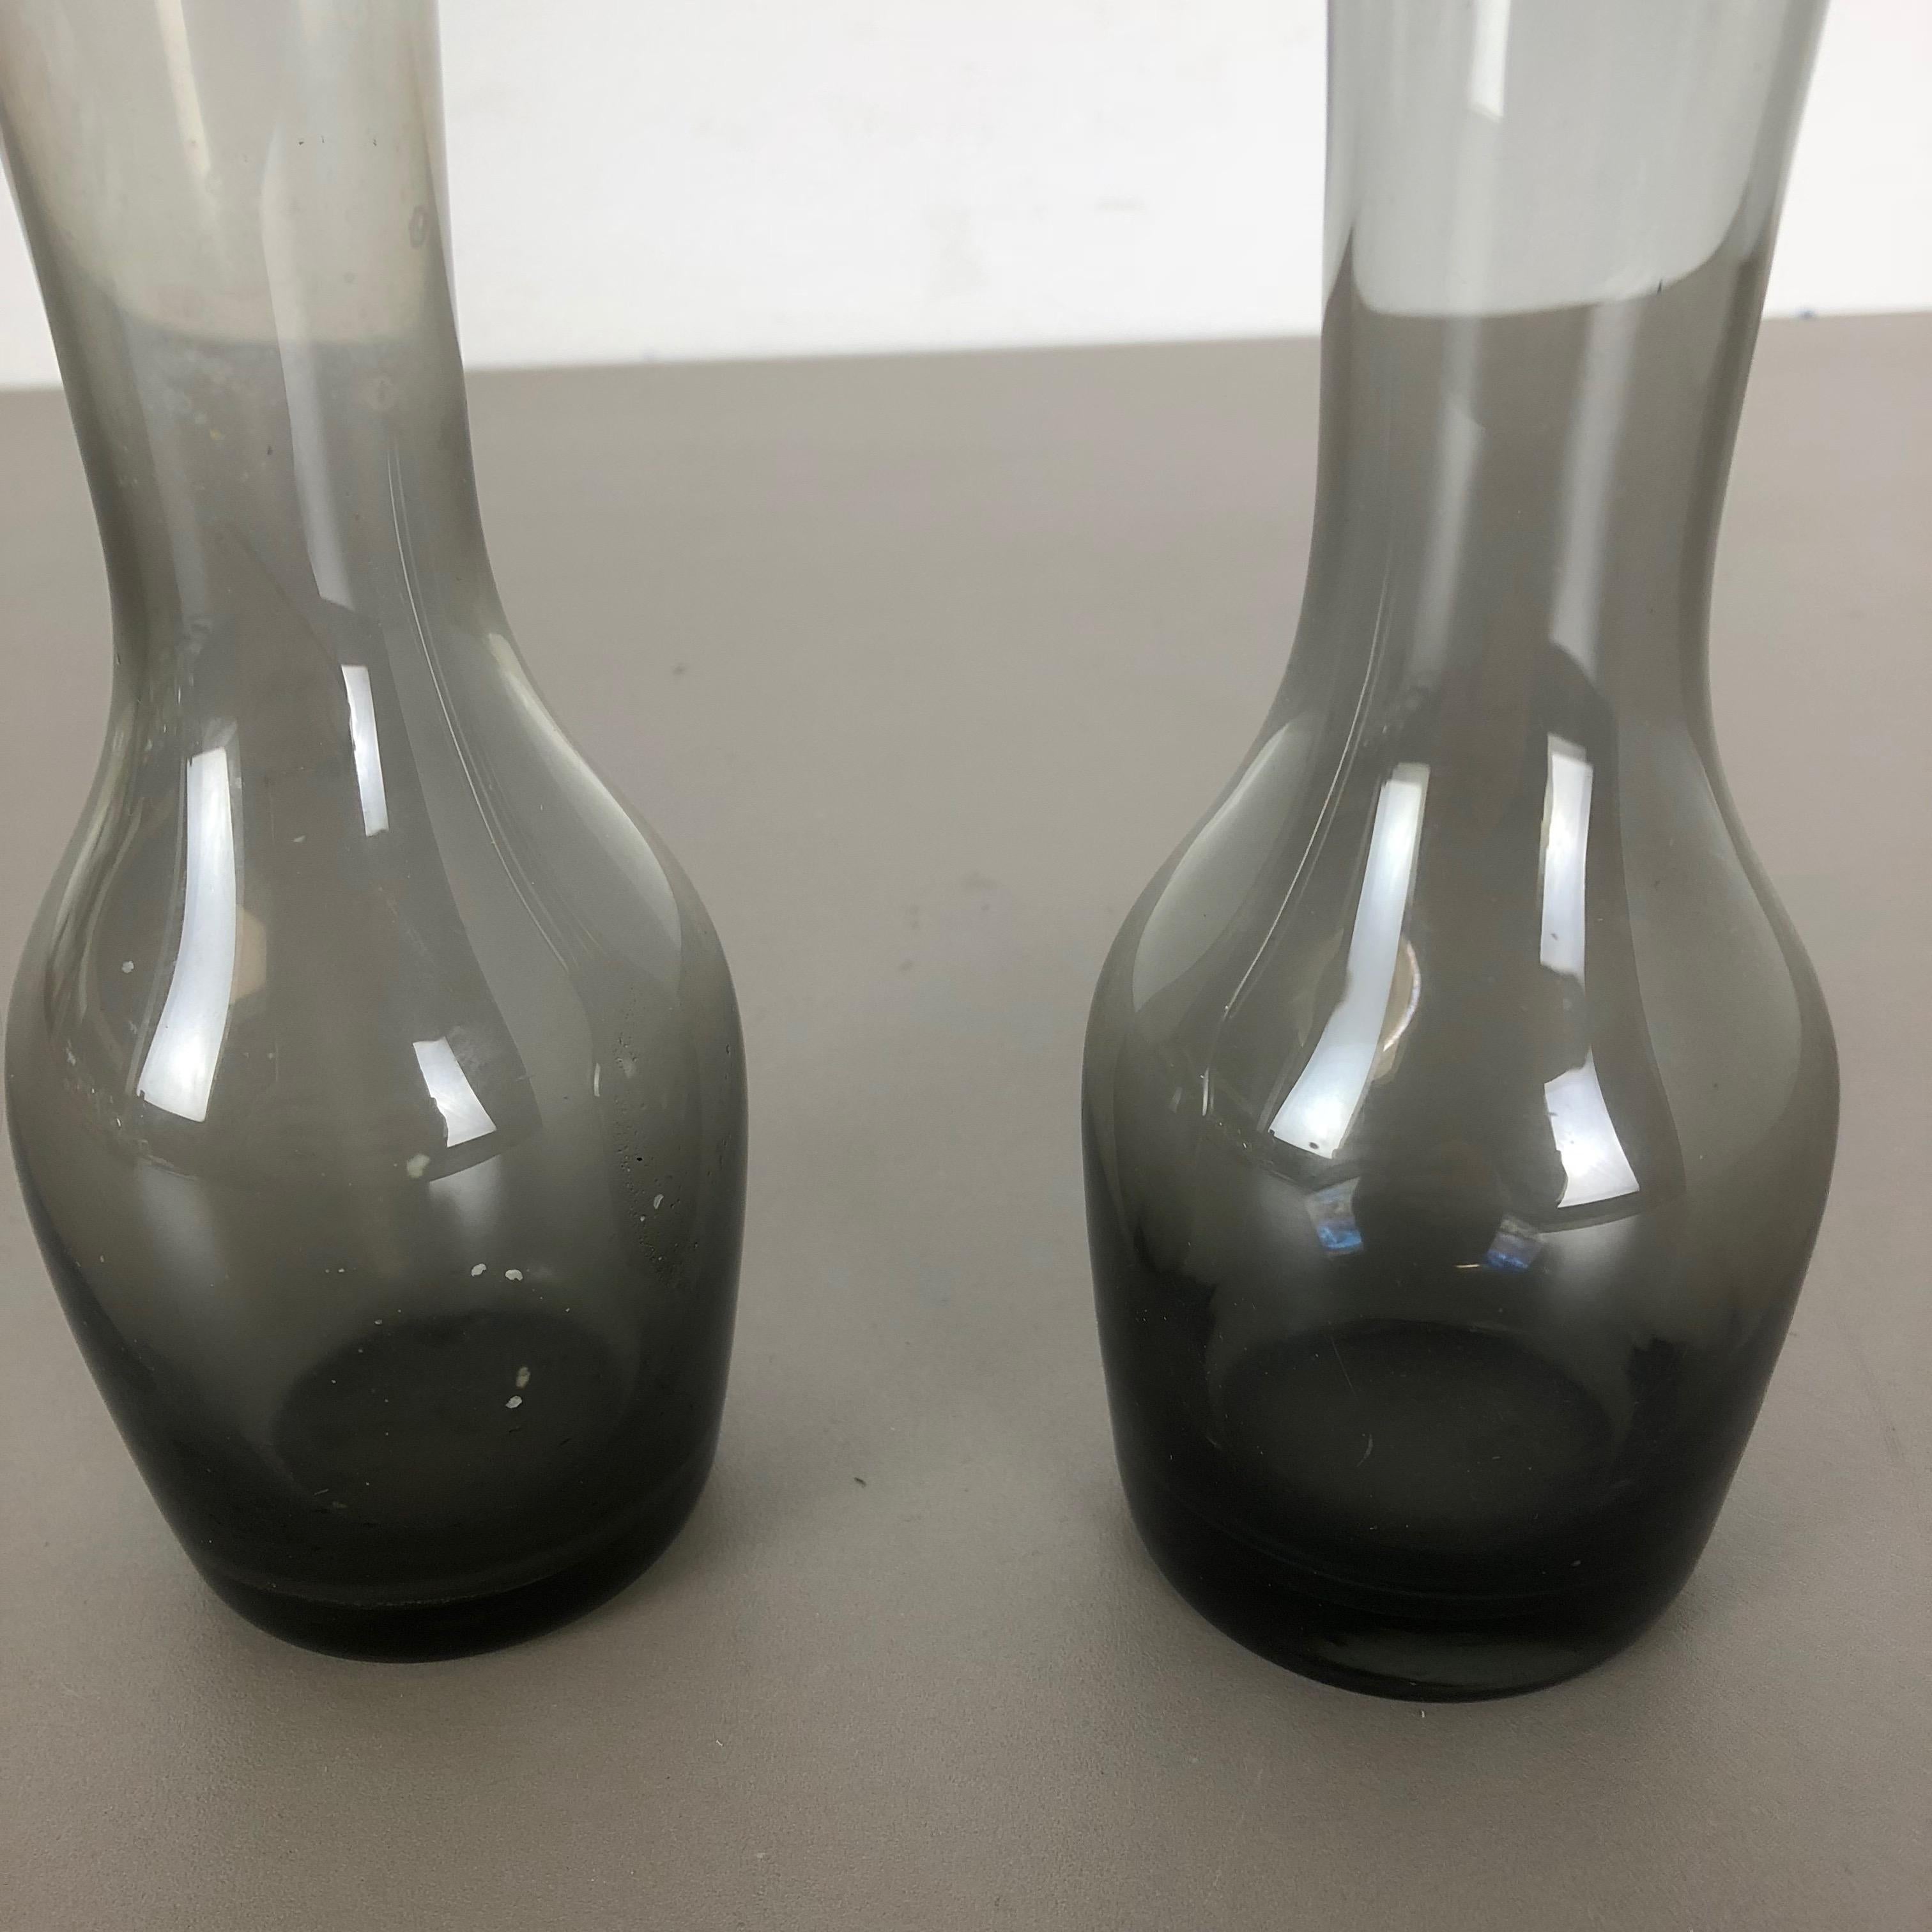 Vintage 1960s Set of 2 Turmalin Vases by Wilhelm Wagenfeld for WMF, Germany For Sale 2